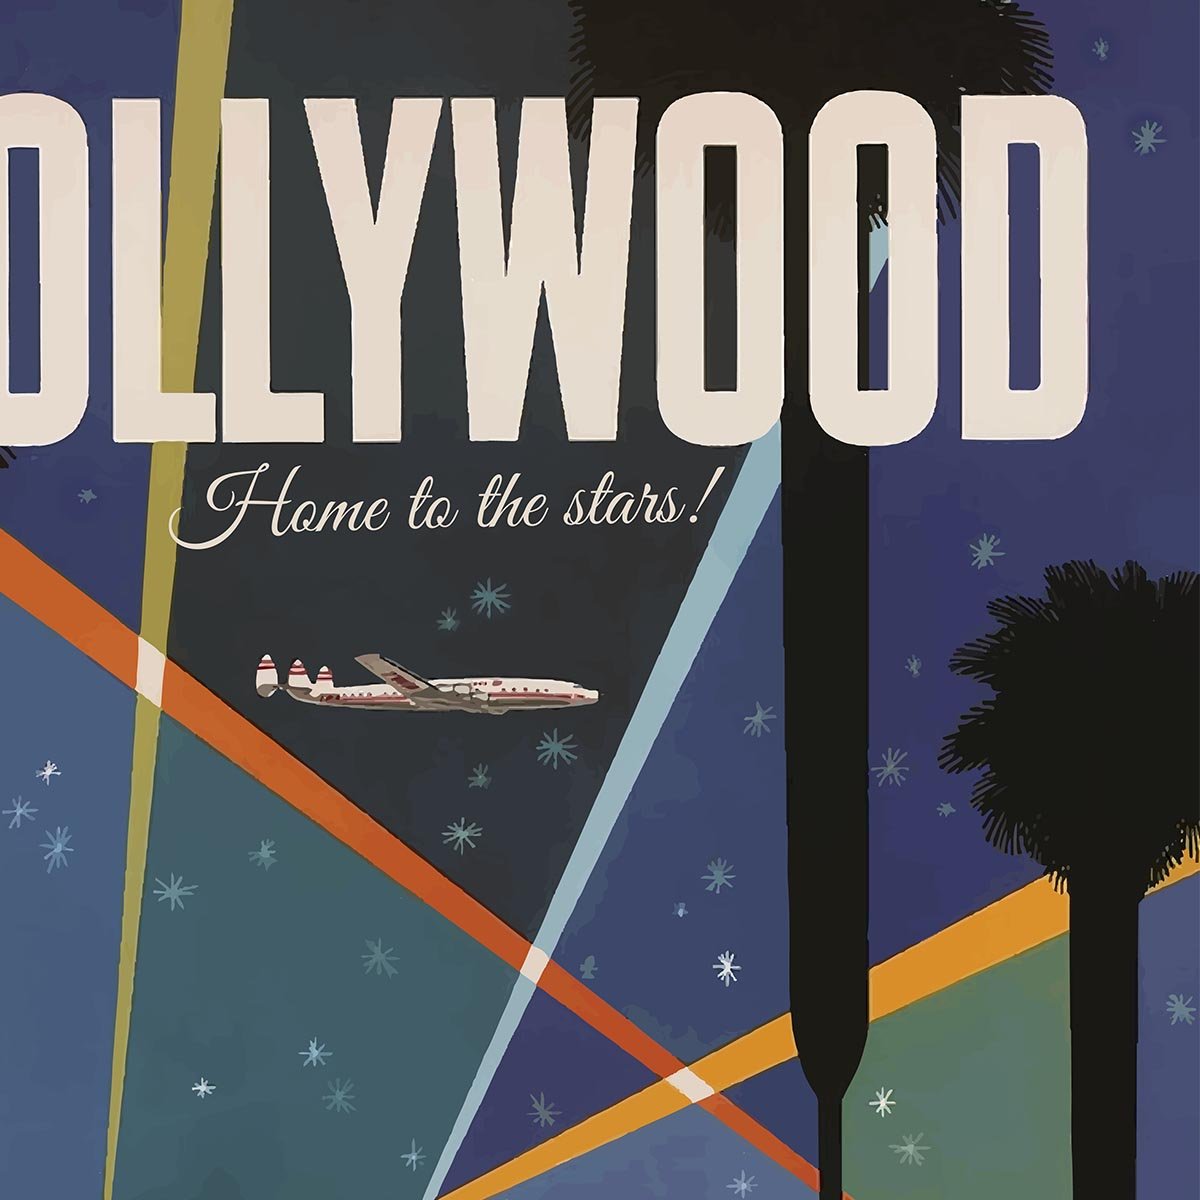 Hollywood Travel Poster